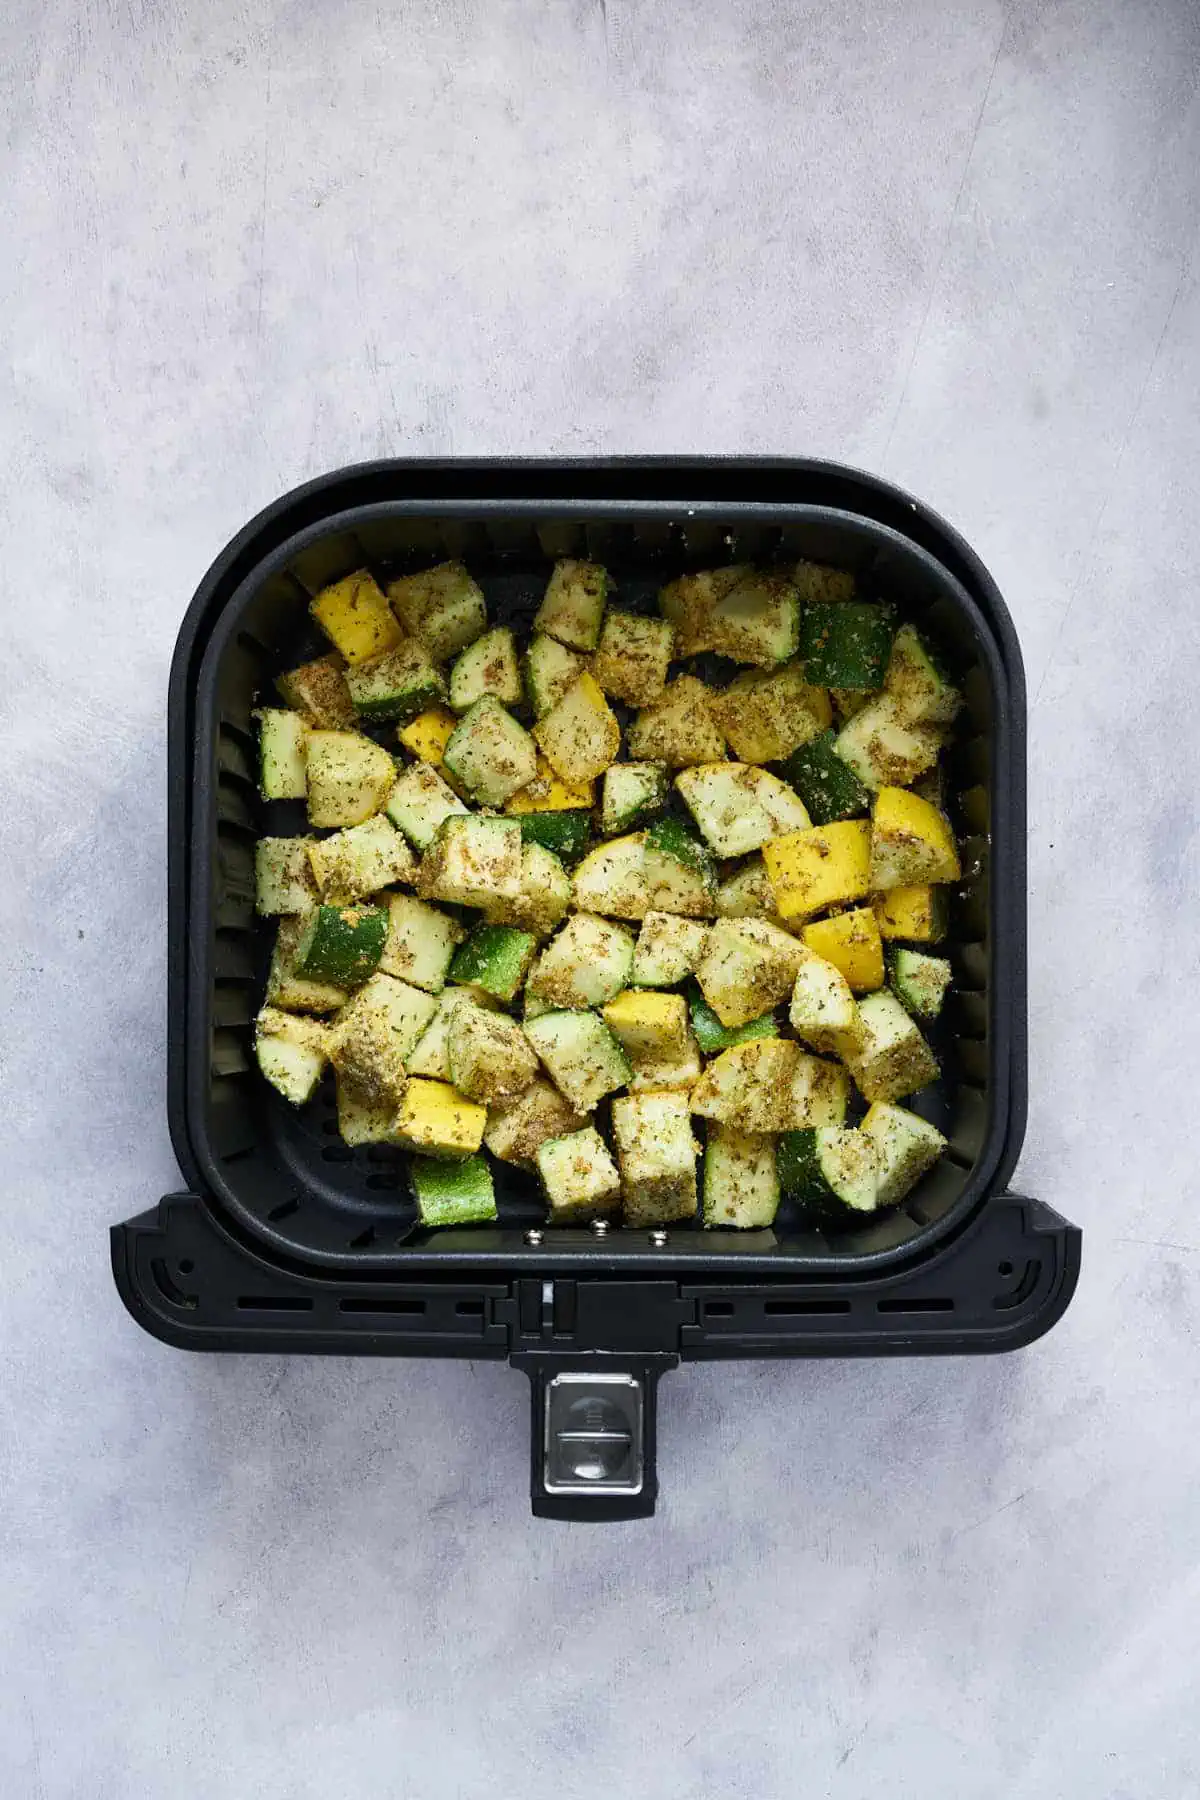 Seasoned yellow squash and zucchini in the air fryer basket before cooking.